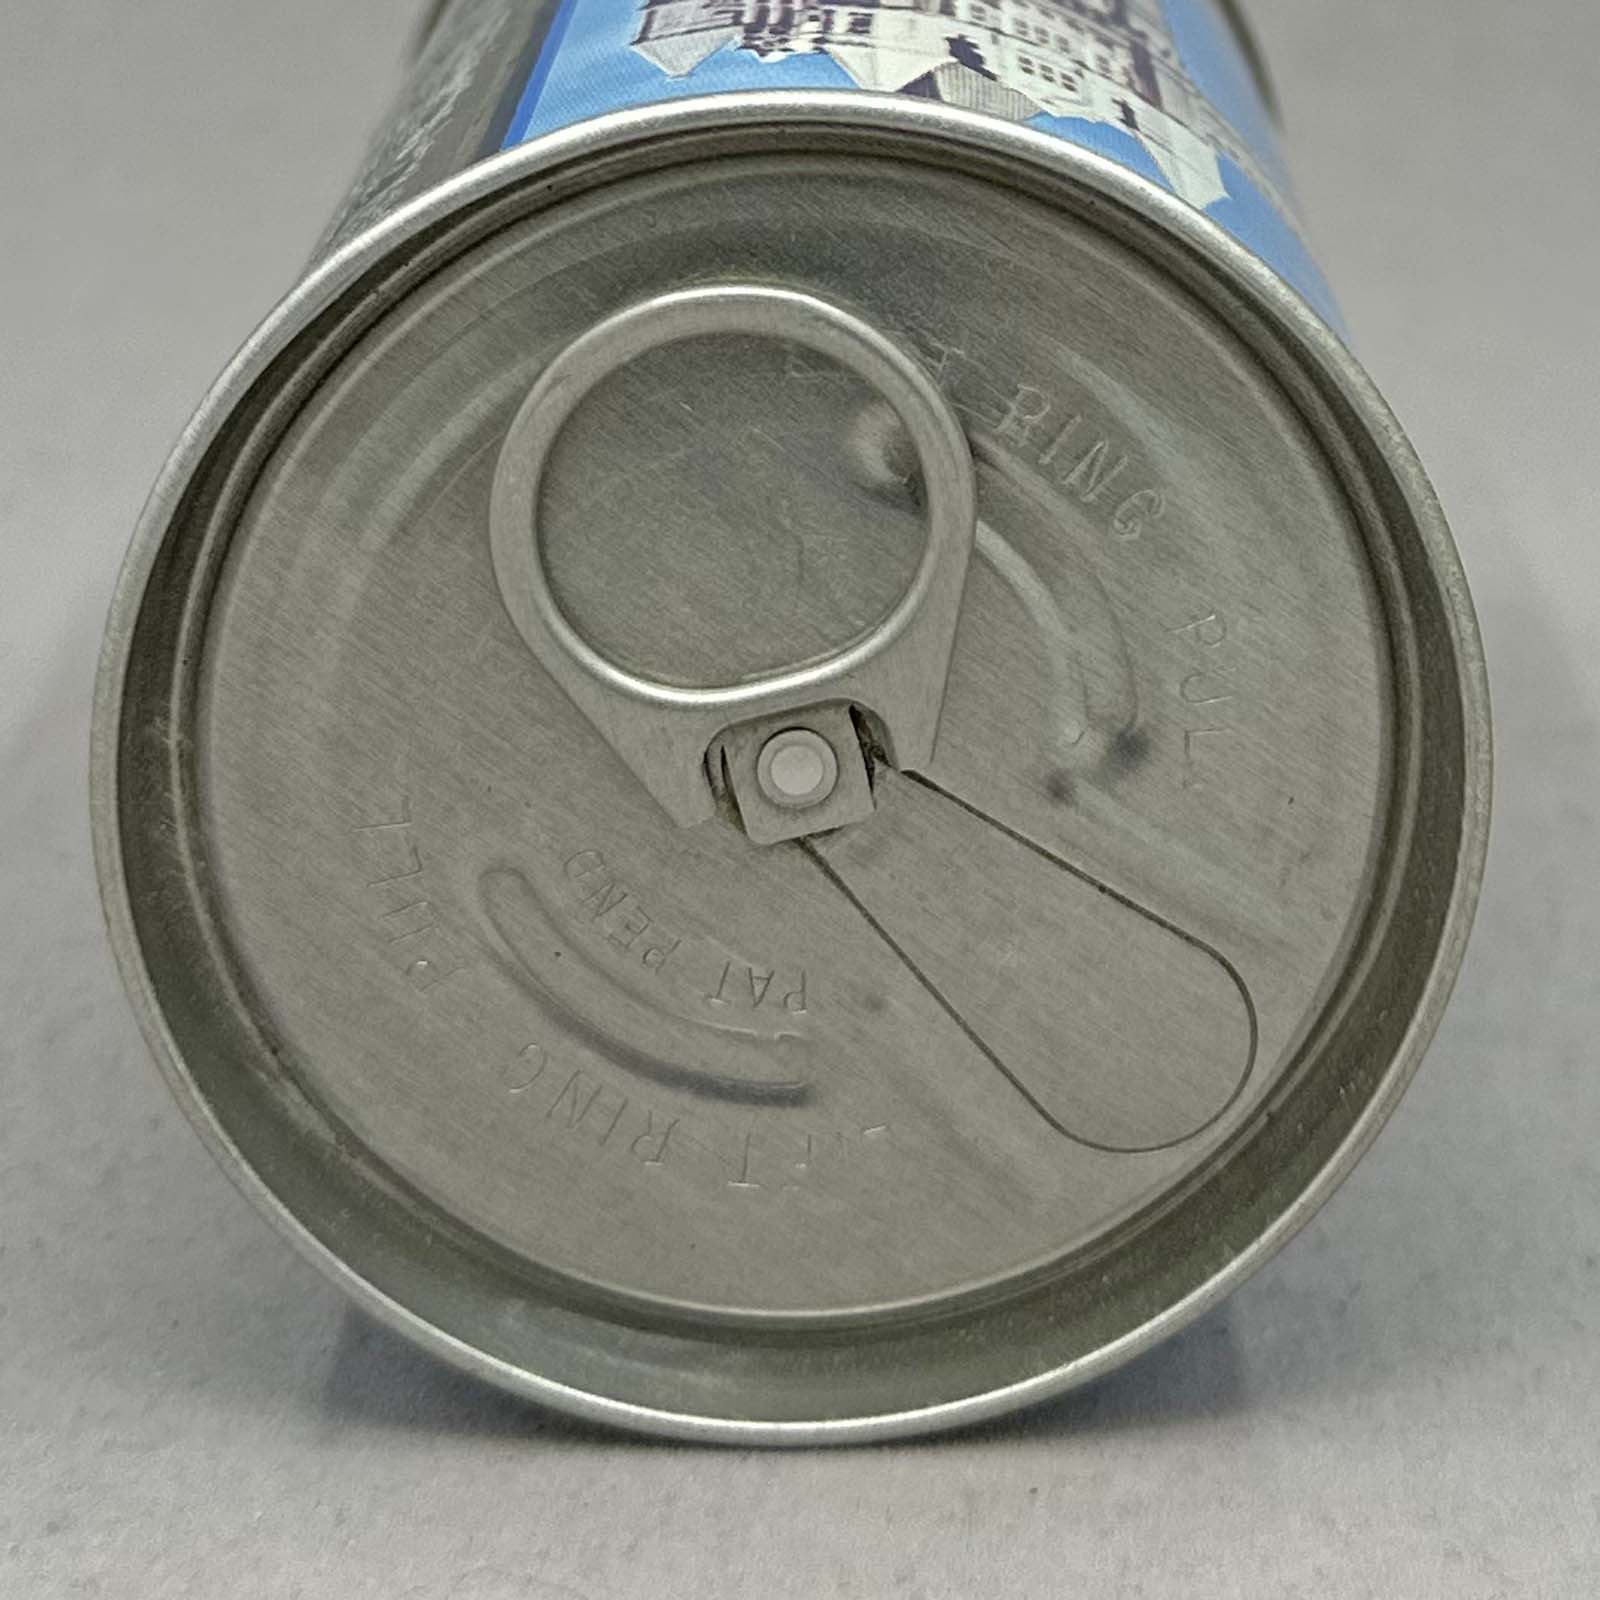 007 82-31 pull tab beer can 5